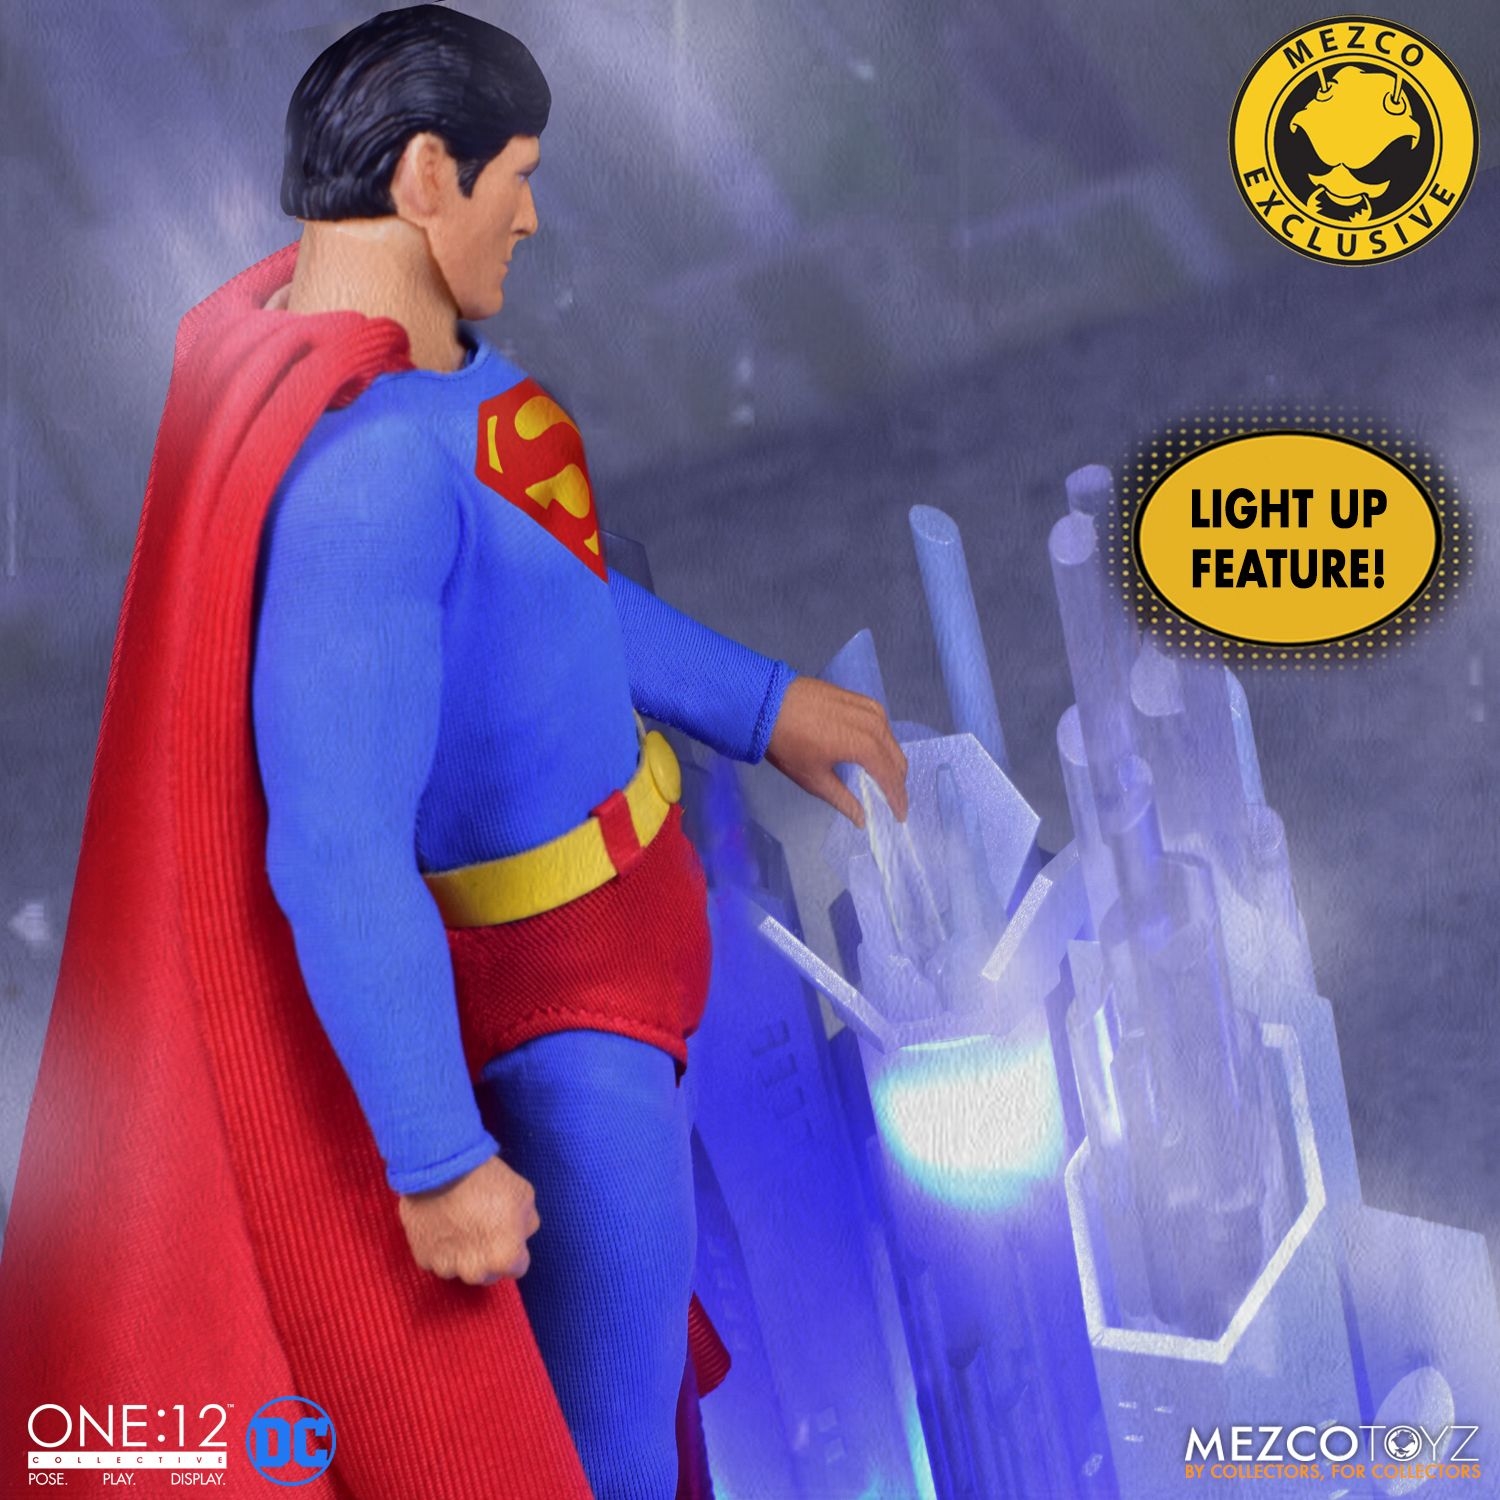 JUL218102 - ONE-12 COLLECTIVE SUPERMAN MAN OF STEEL EDITION AF - Previews  World